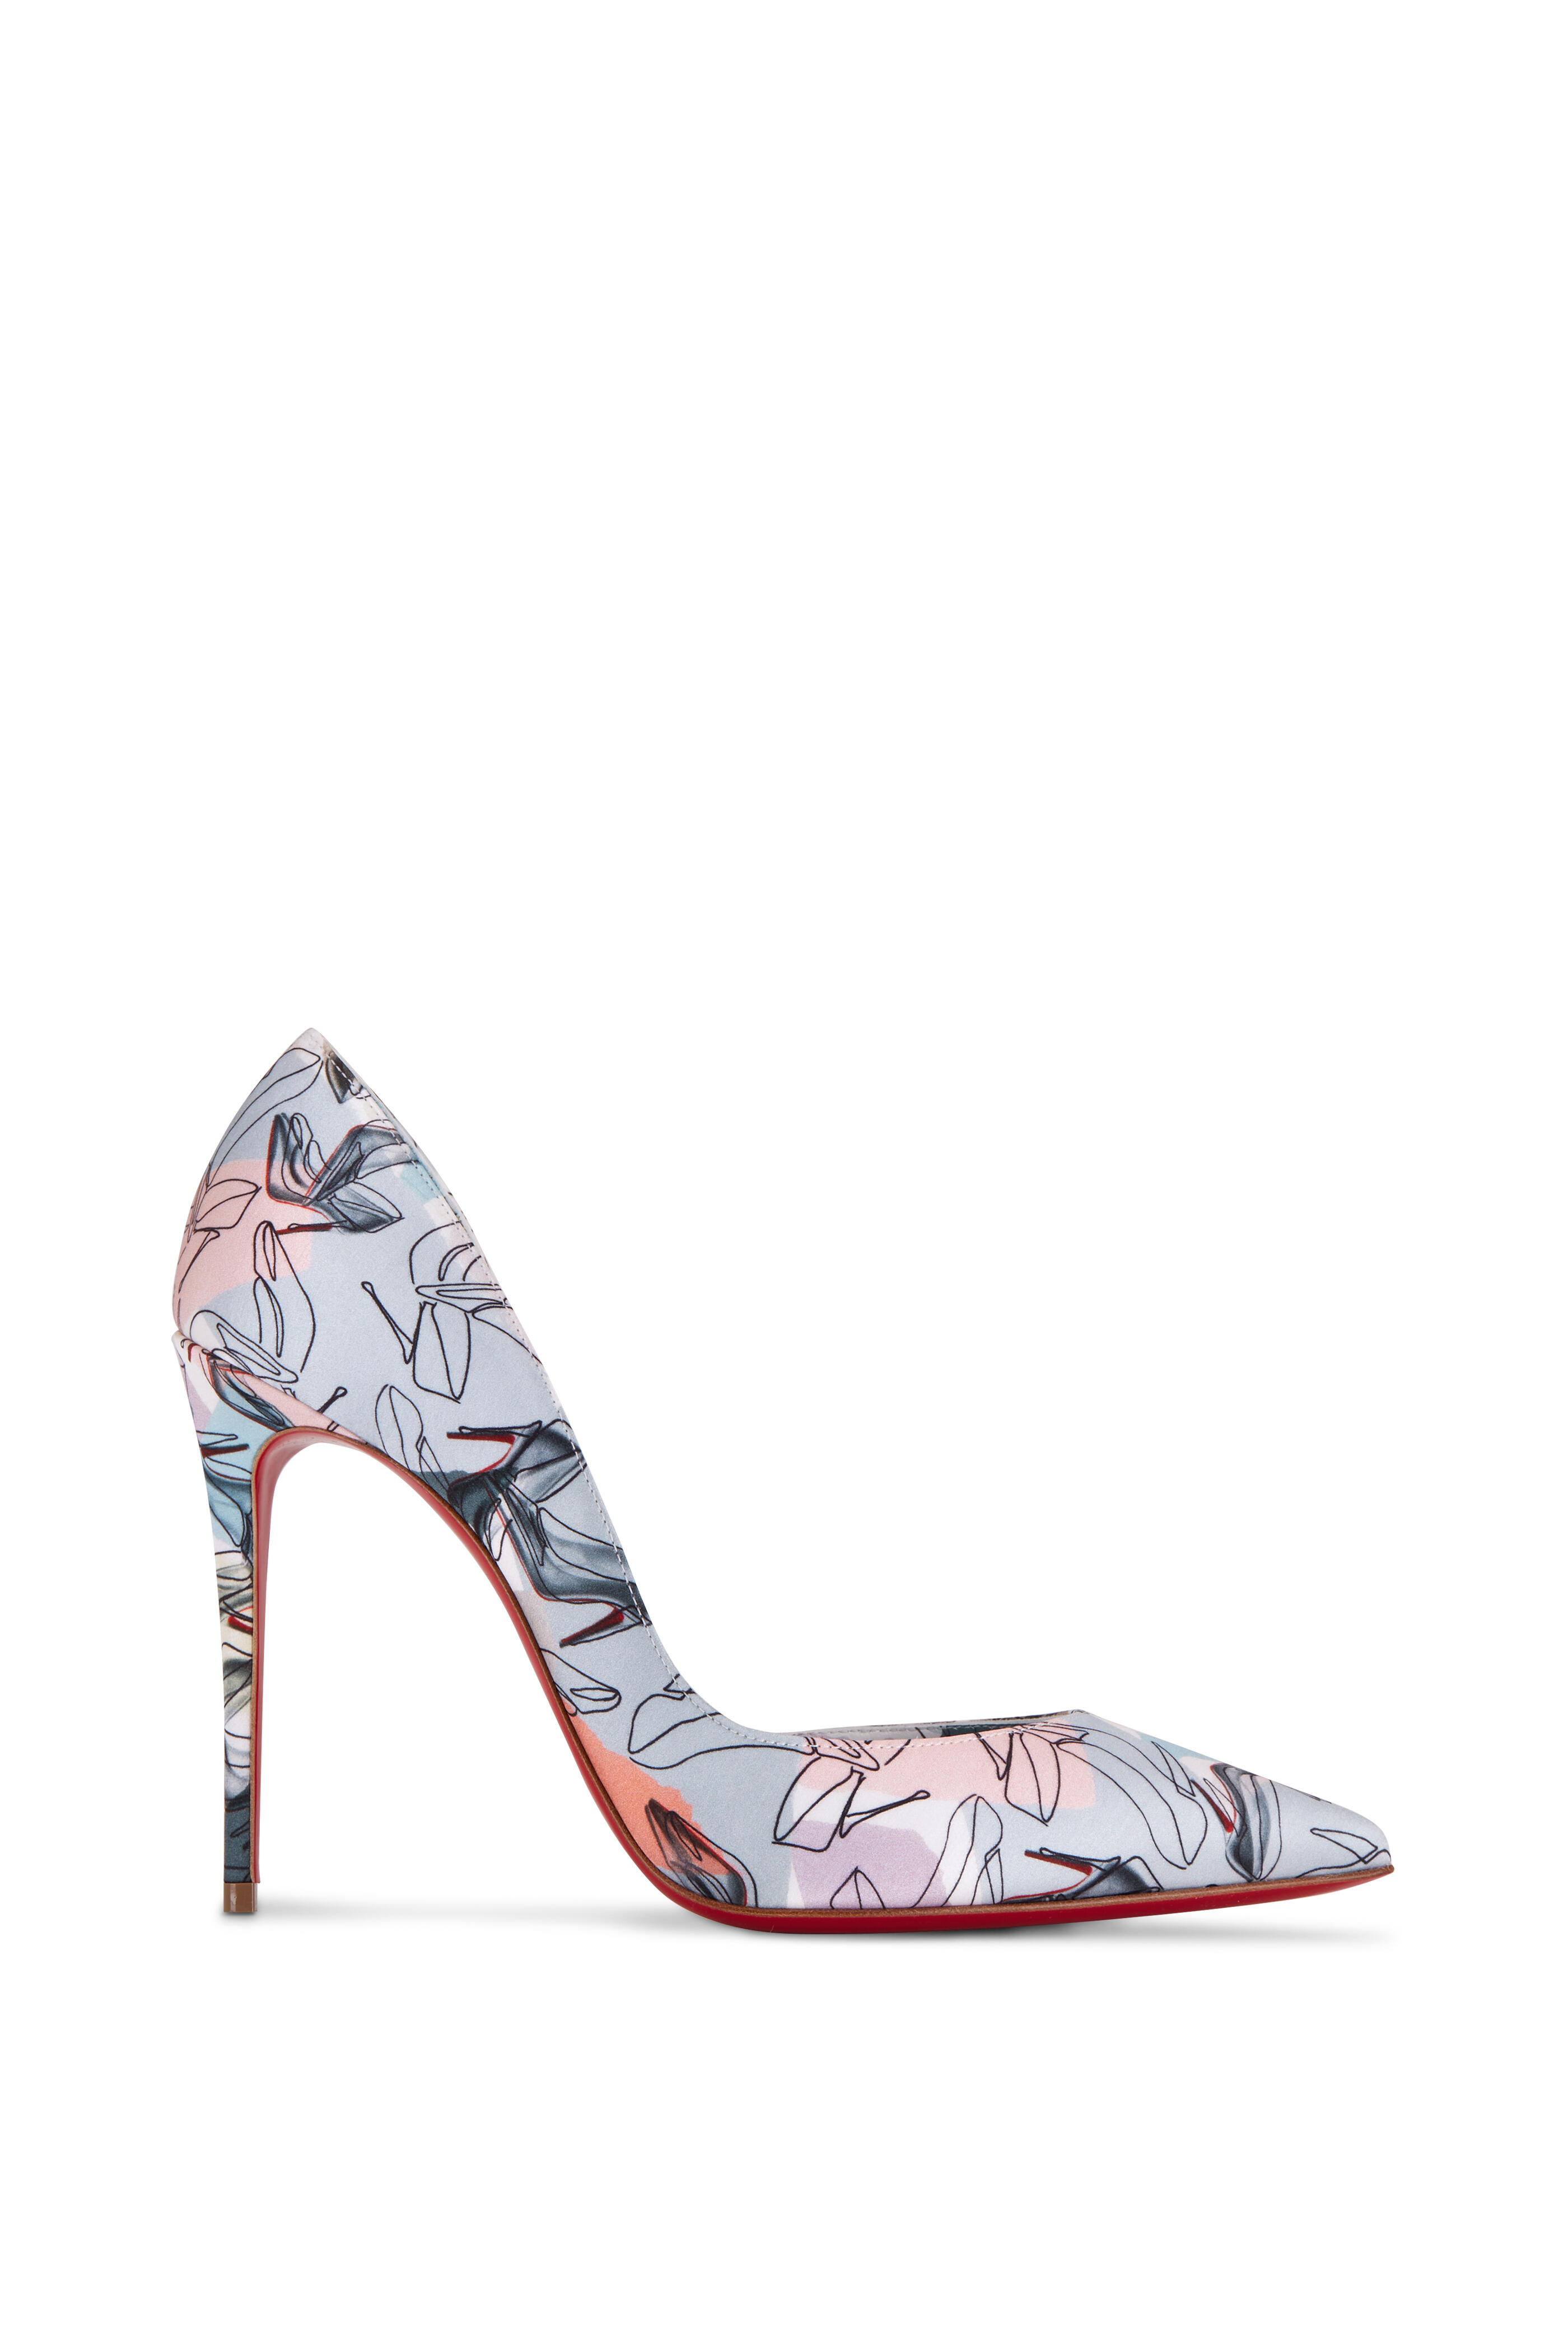 Women's Christian Louboutin Stilettos and high heels from $250